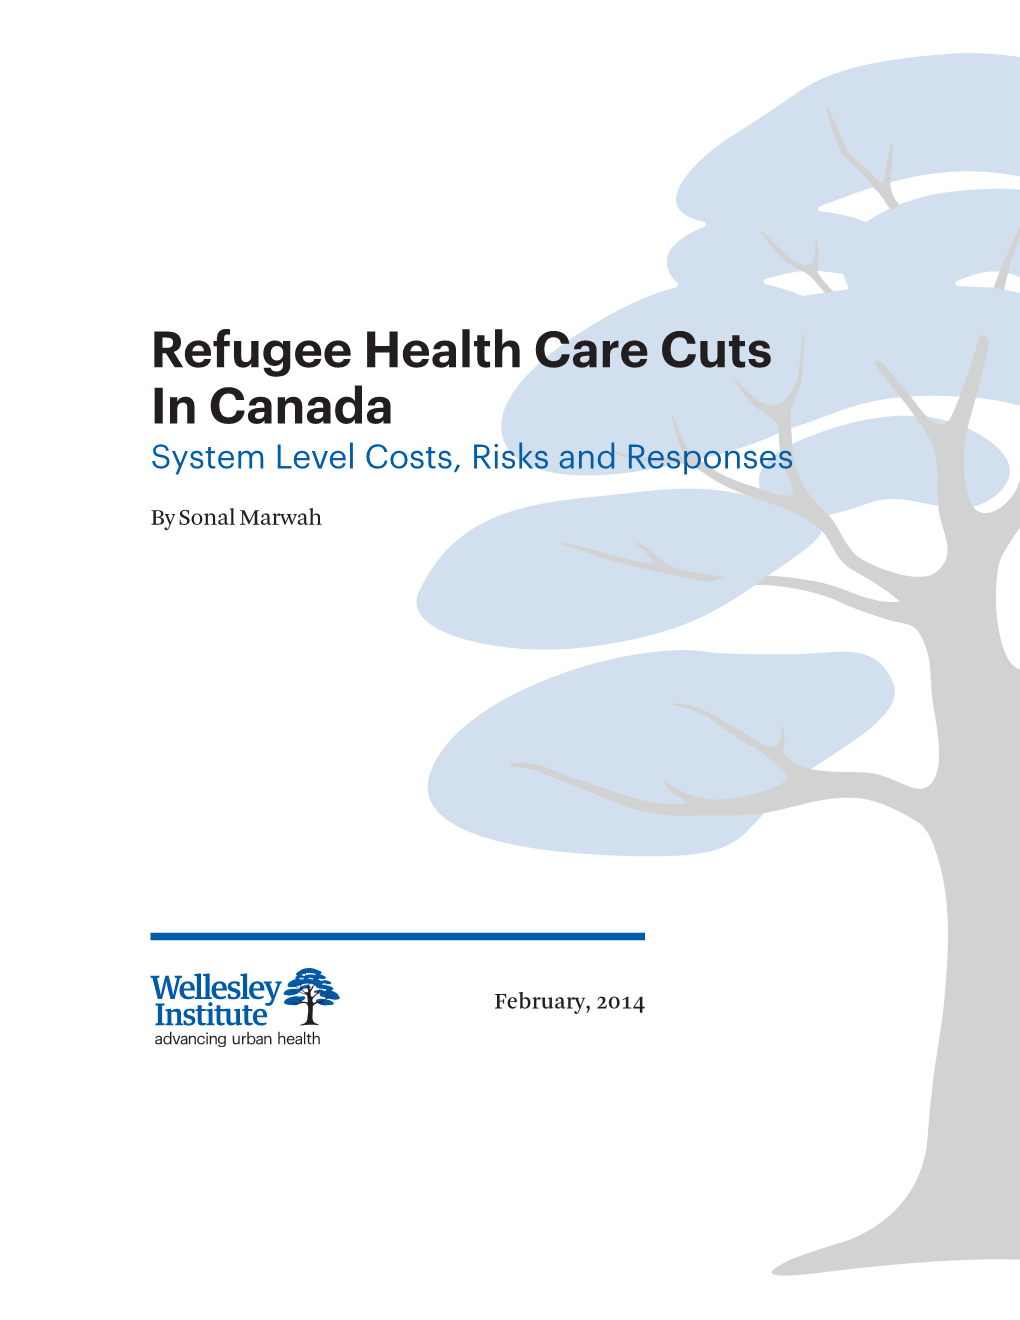 Refugee Health Care Cuts in Canada System Level Costs, Risks and Responses